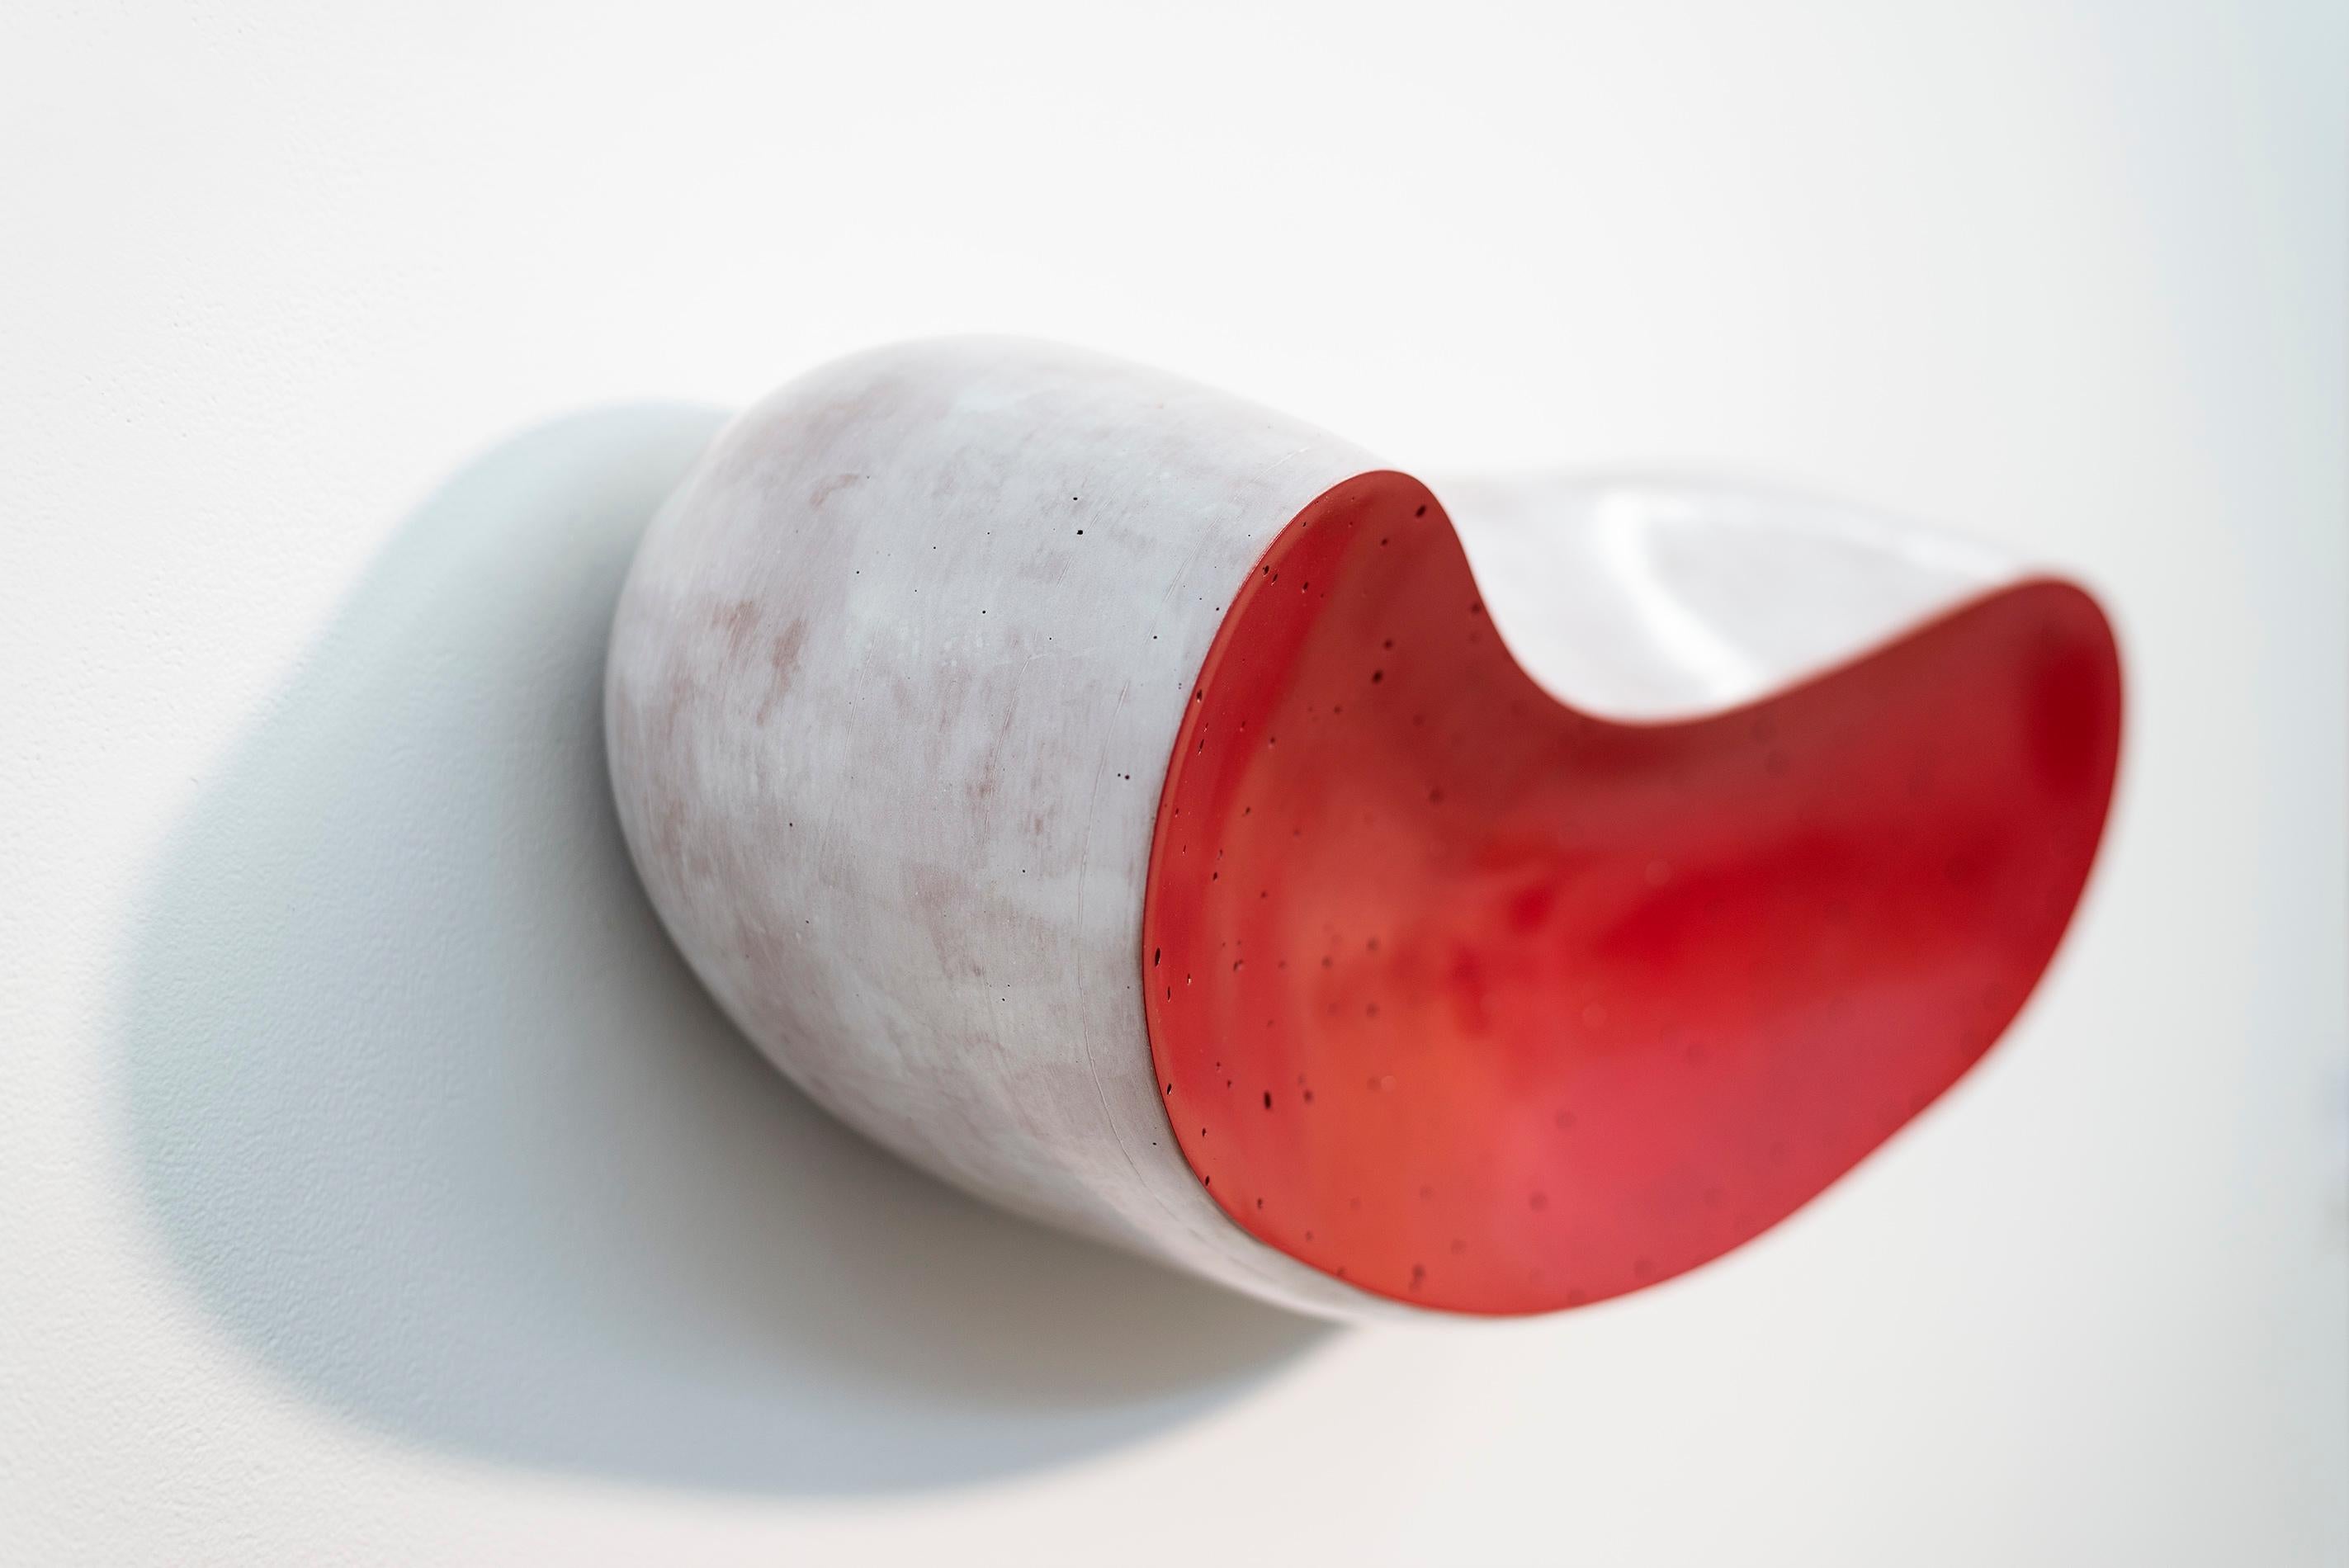 La Bouche - playful, red, white, abstract, elongated, ceramic wall sculpture For Sale 6